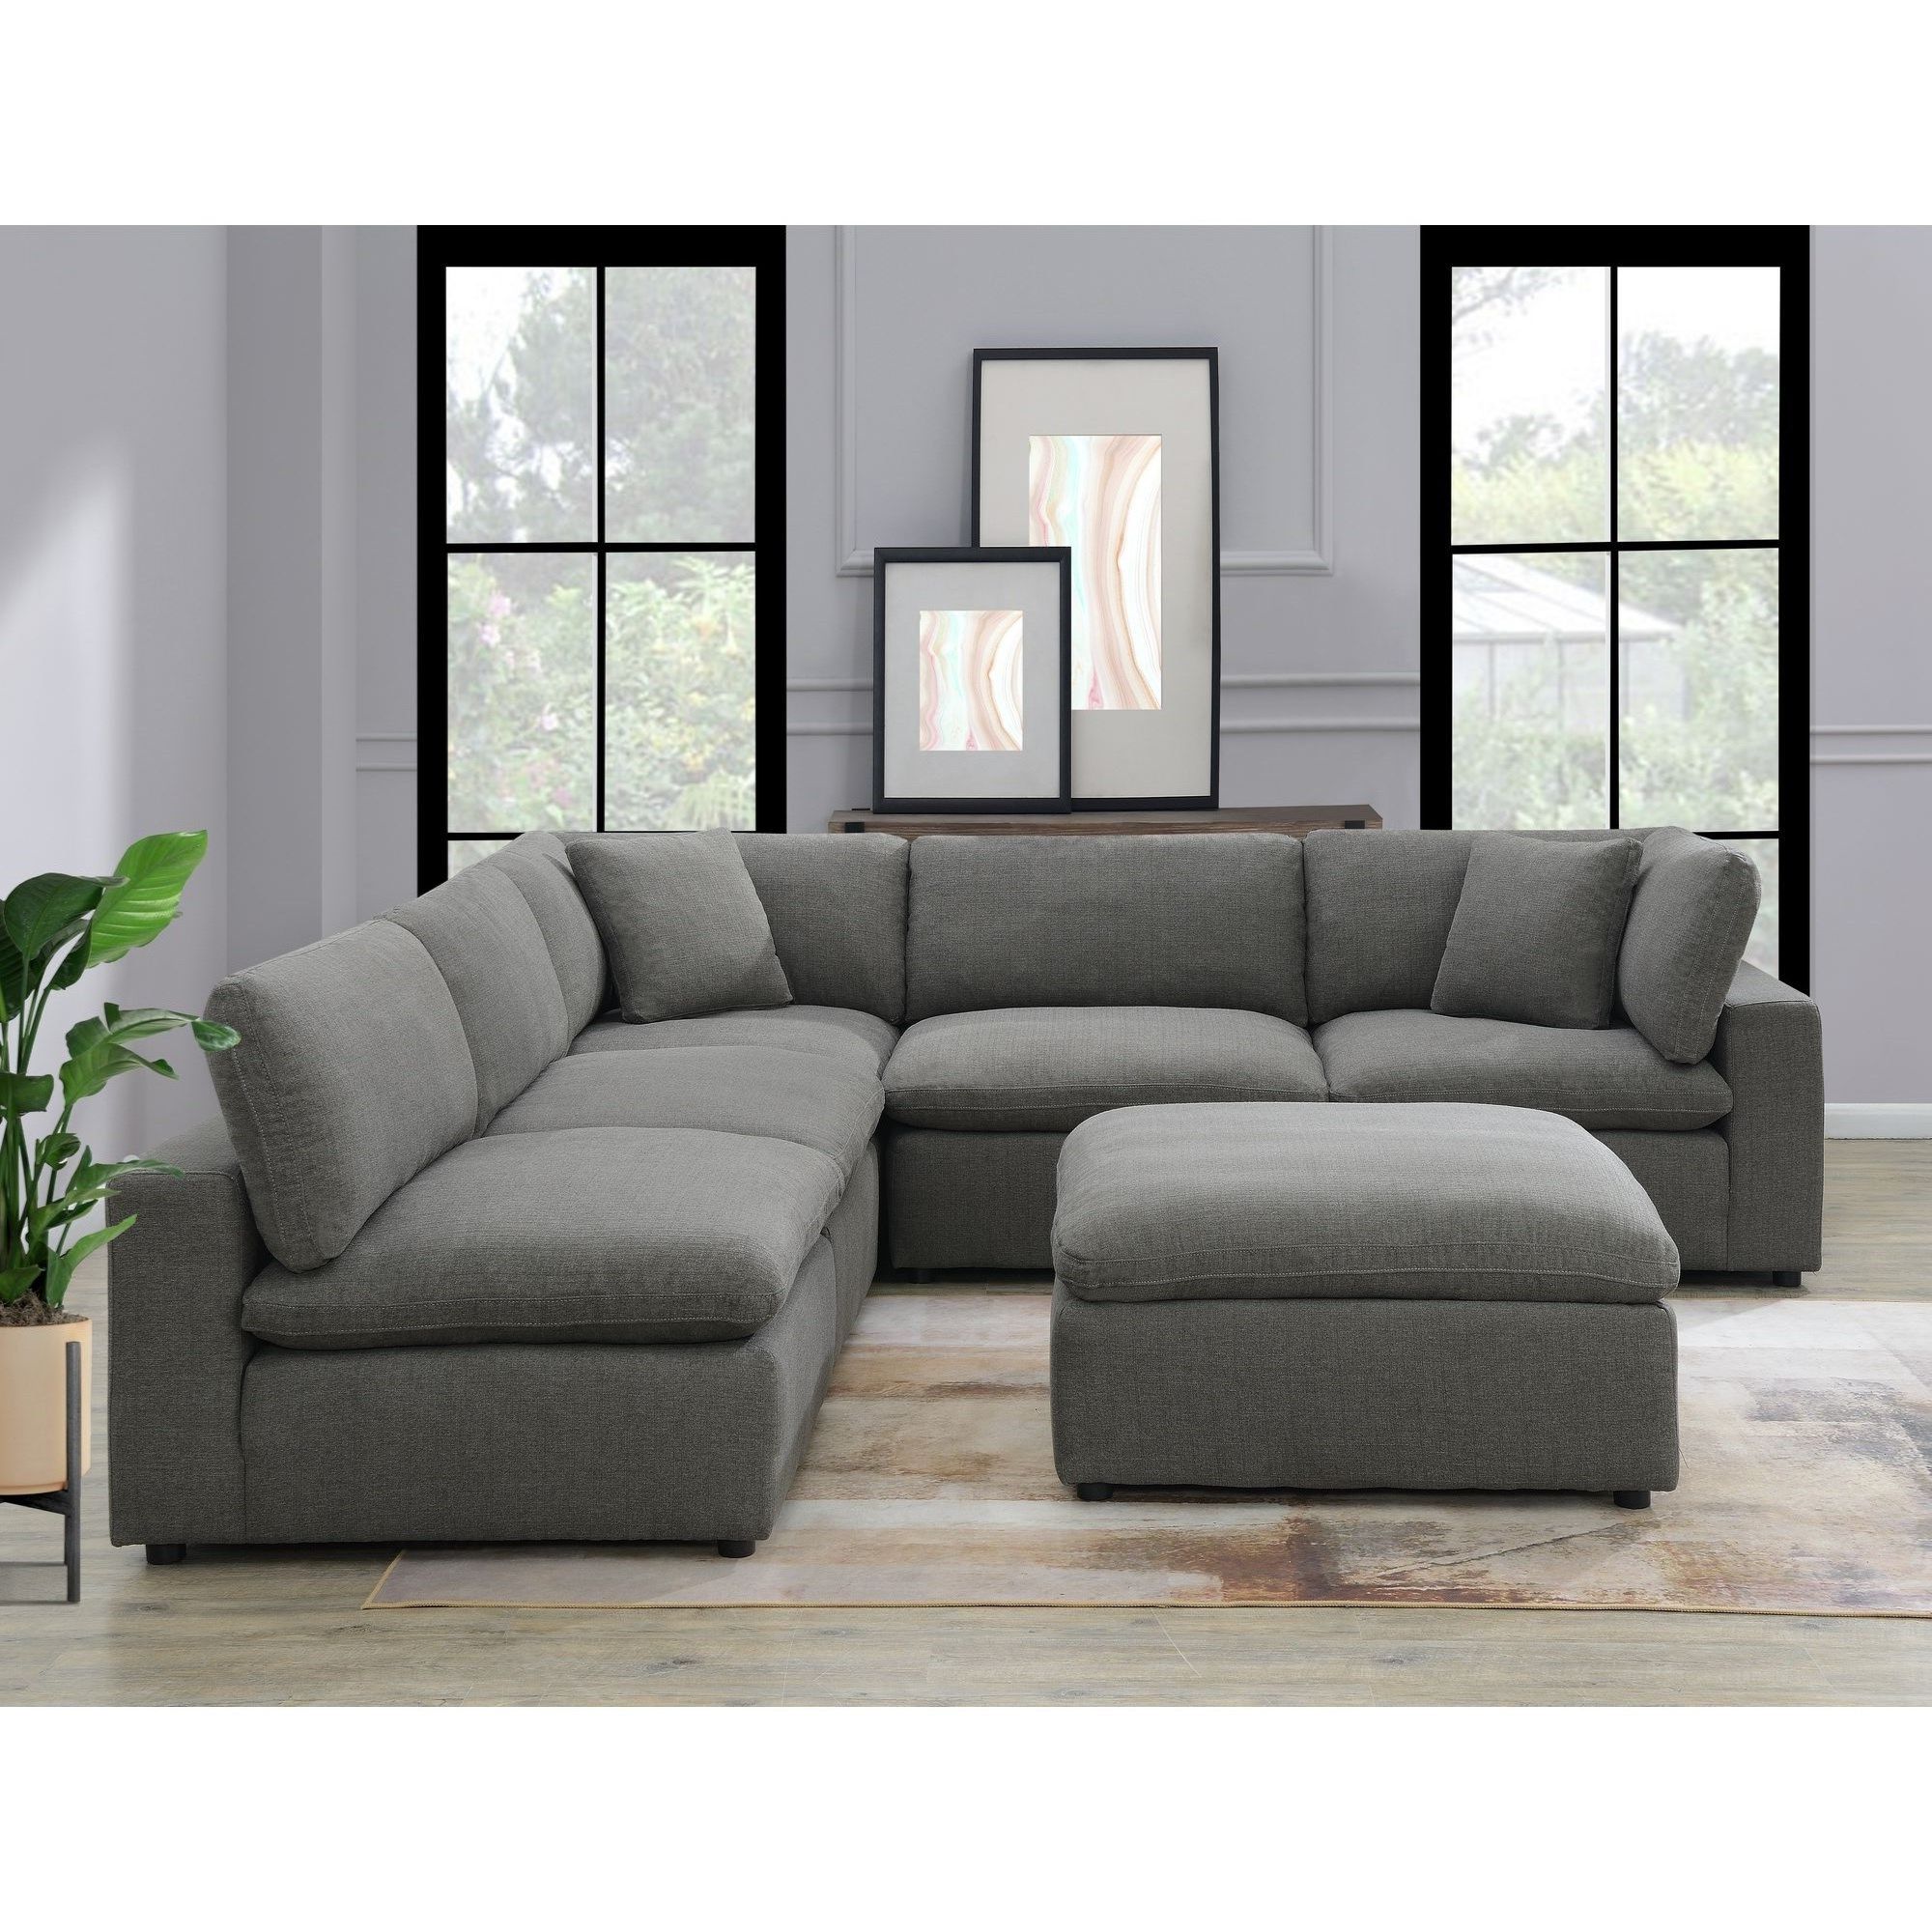 Well Liked Cream Velvet Modular Sectionals With Regard To Elements International Cloud 9 Contemporary Modular Sectional Sofa (View 15 of 15)